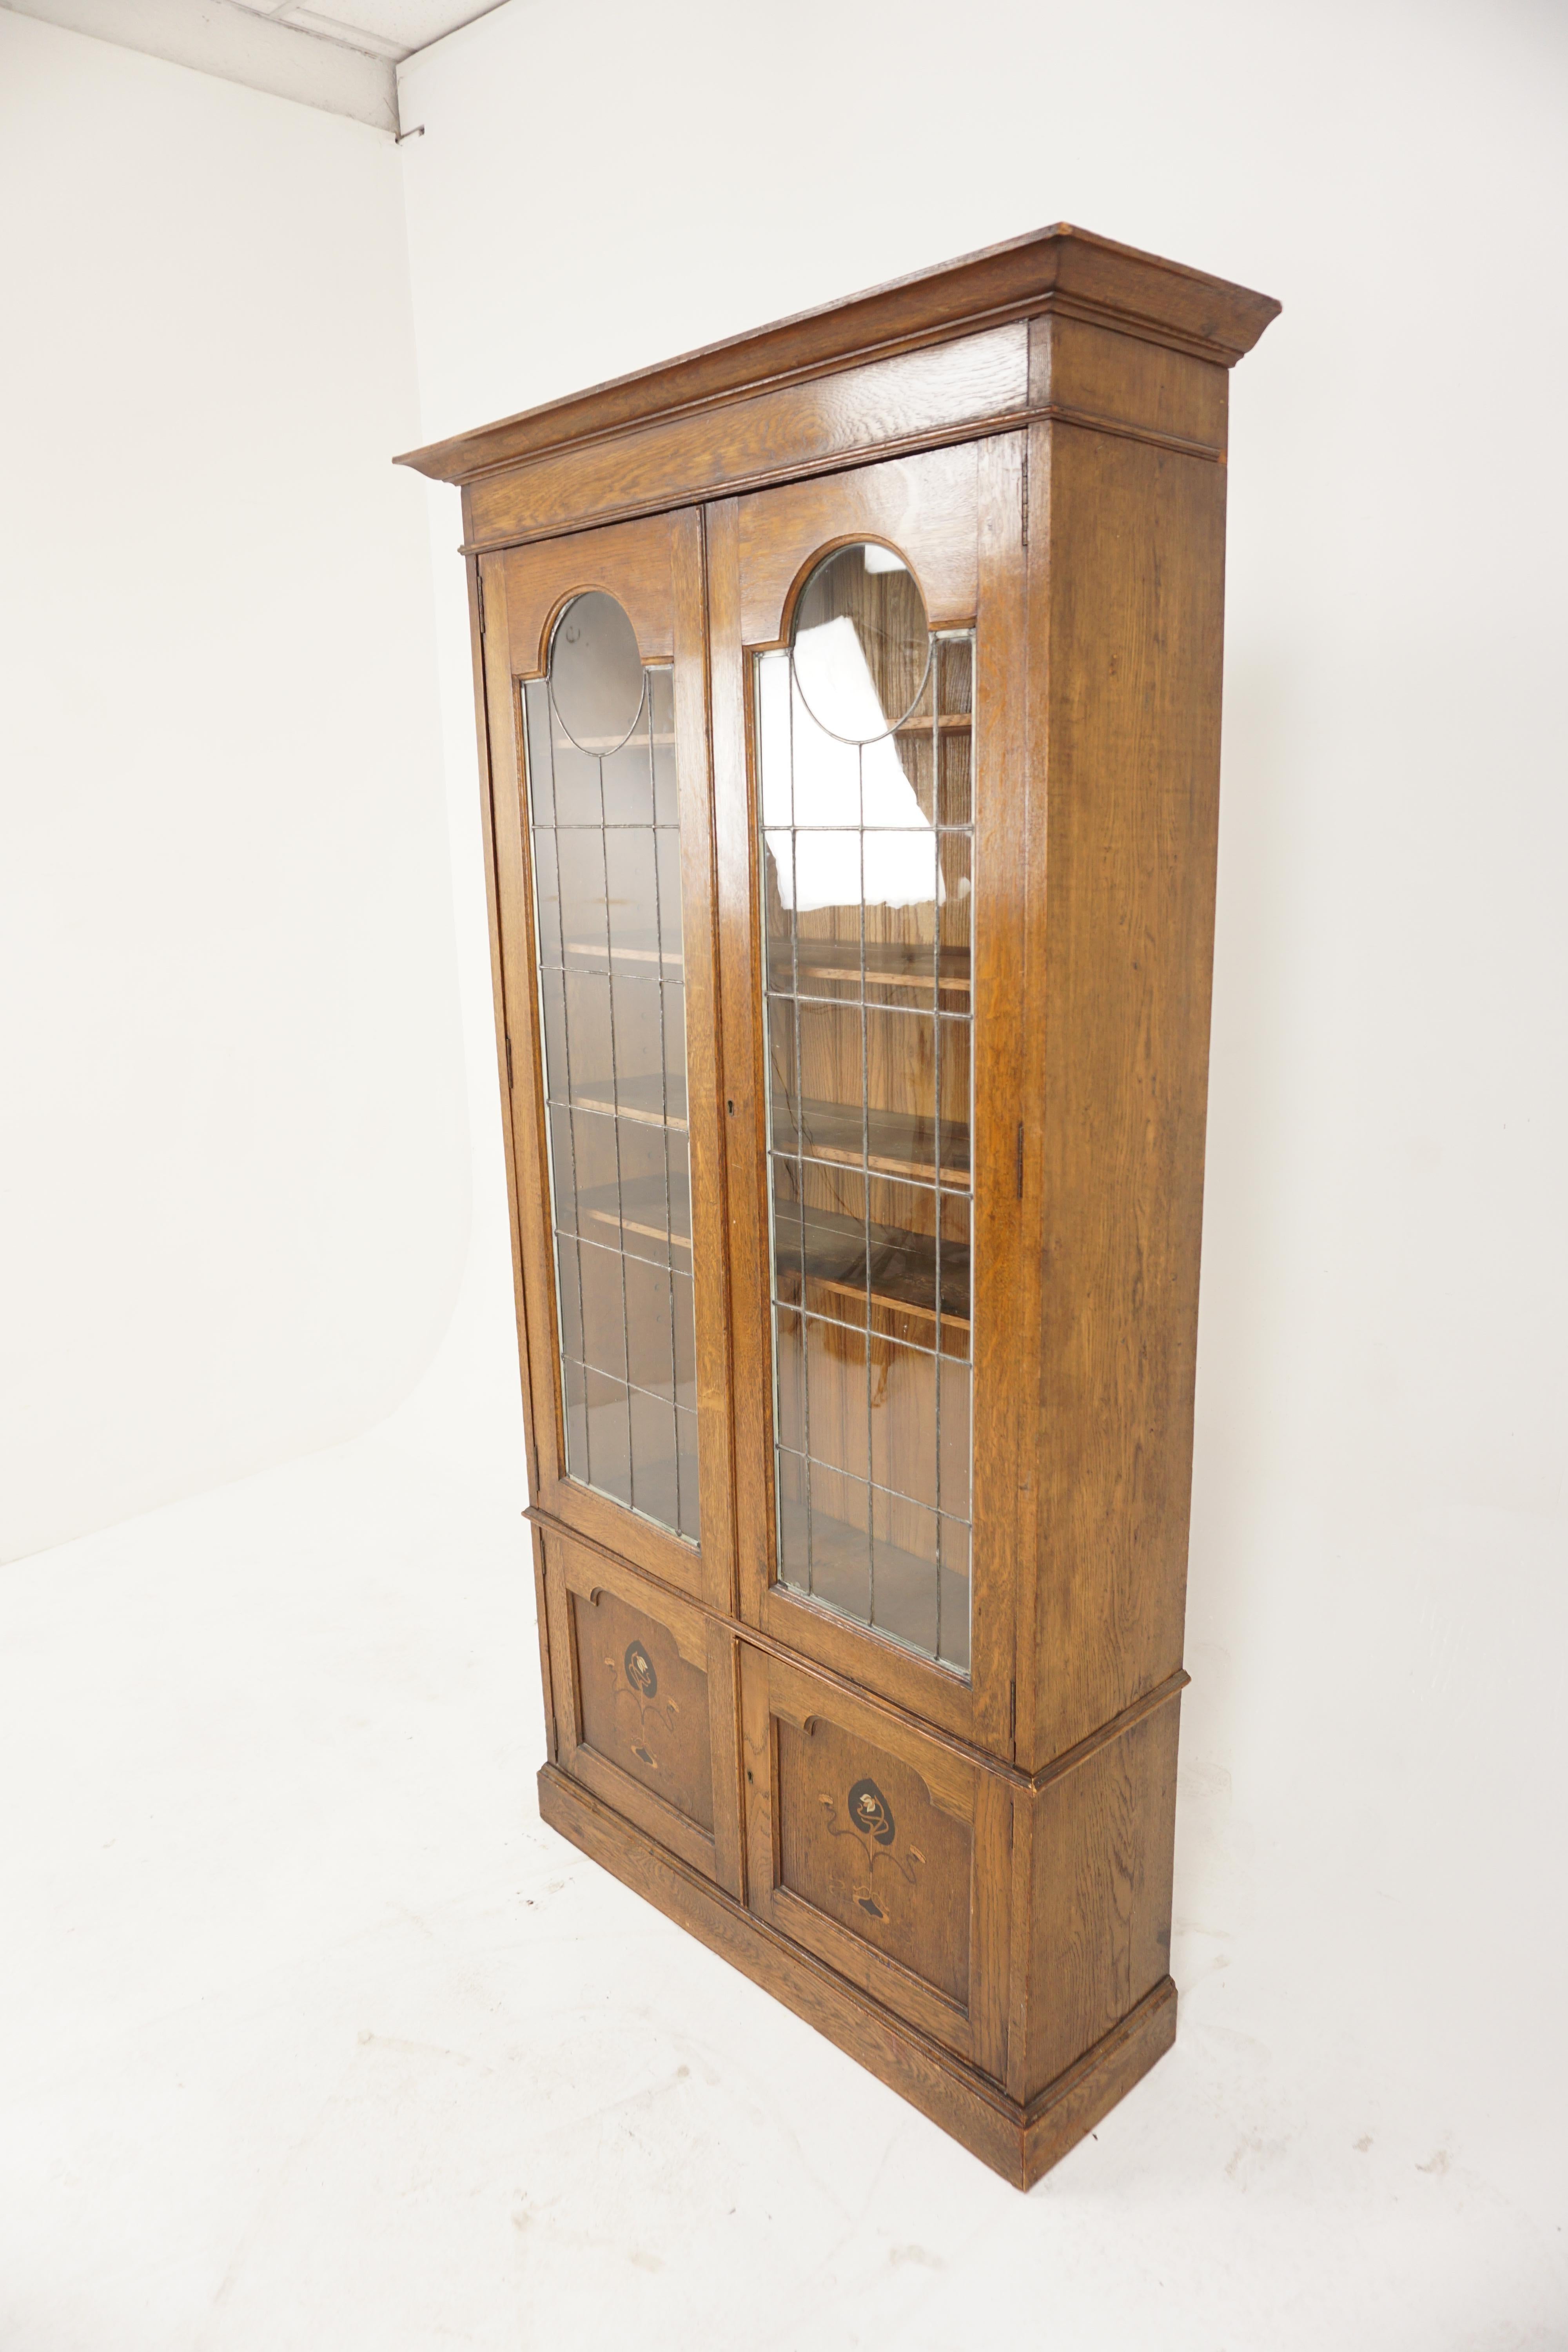 Antique Oak Art Nouveau, Arts & Crafts Inlaid, Leaded Glass Bookcase, Display, Scotland 1900, H1163 

Solid Oak
Original Finish
With Projecting Moulded Cornice
A pair of leaded glass doors open to reveal four adjustable shelves
Pair of inlaid